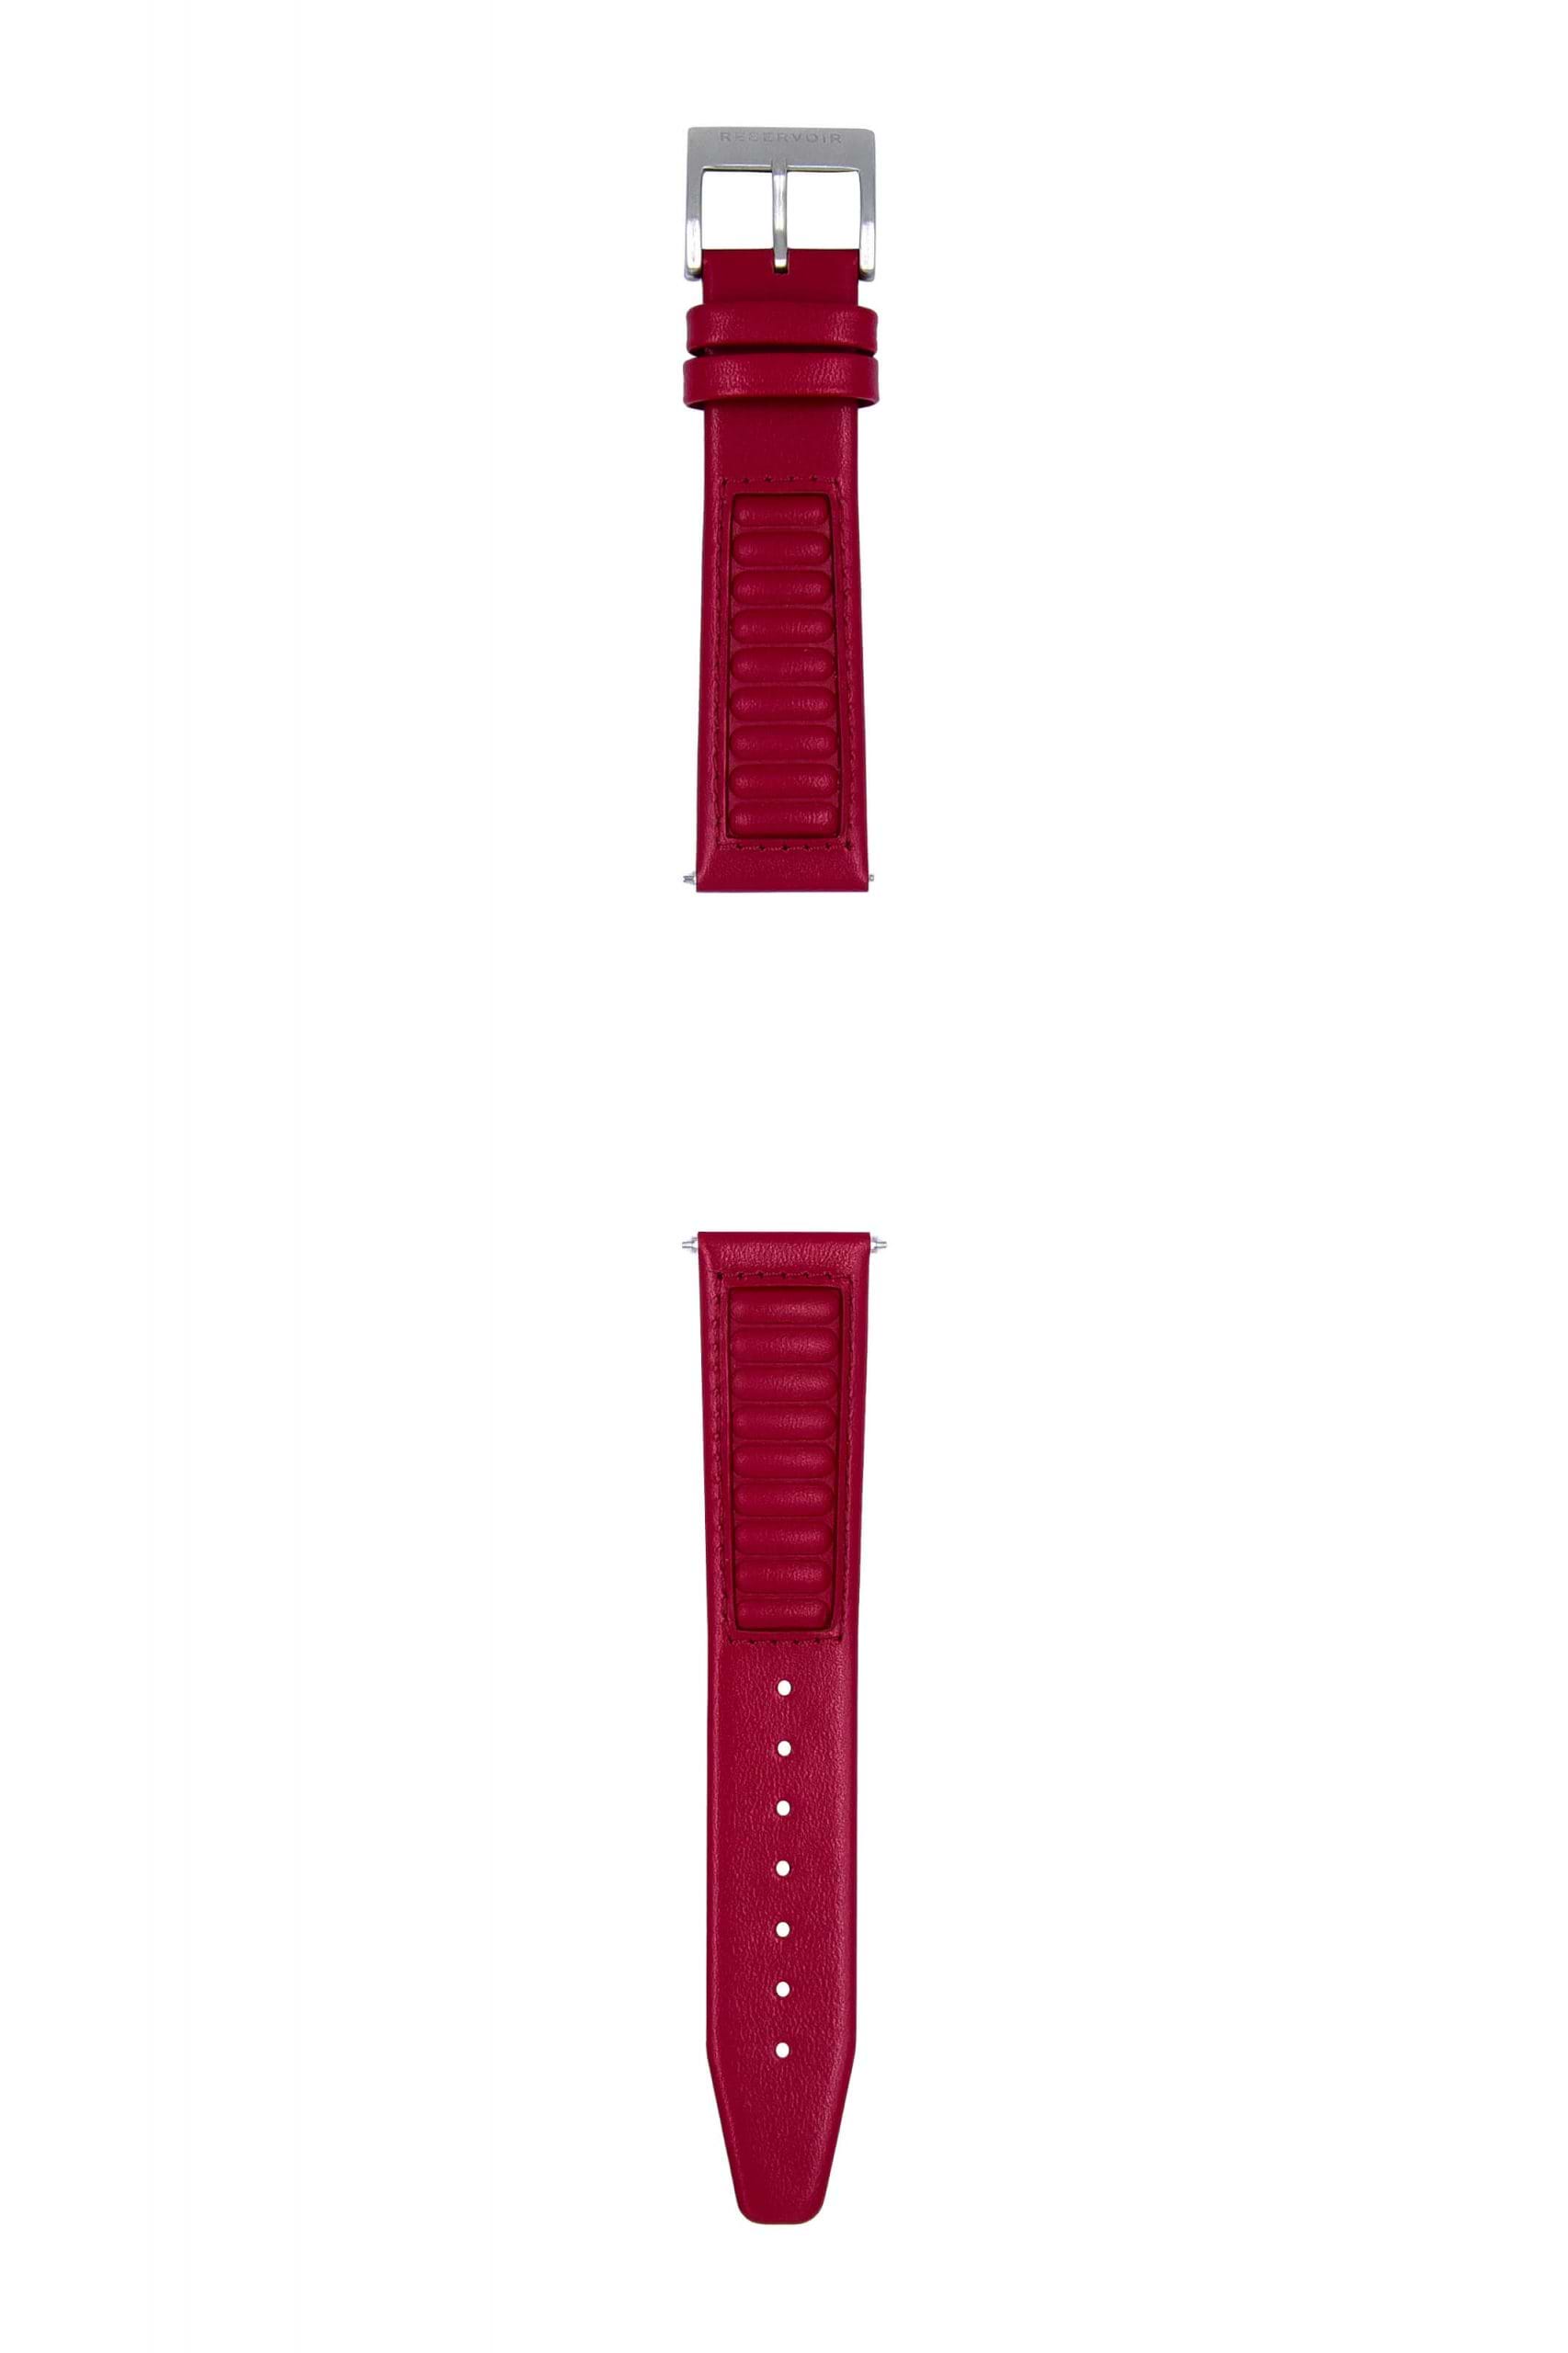 Rich red 356 Porsche leather strap with light grey and mauve accents.